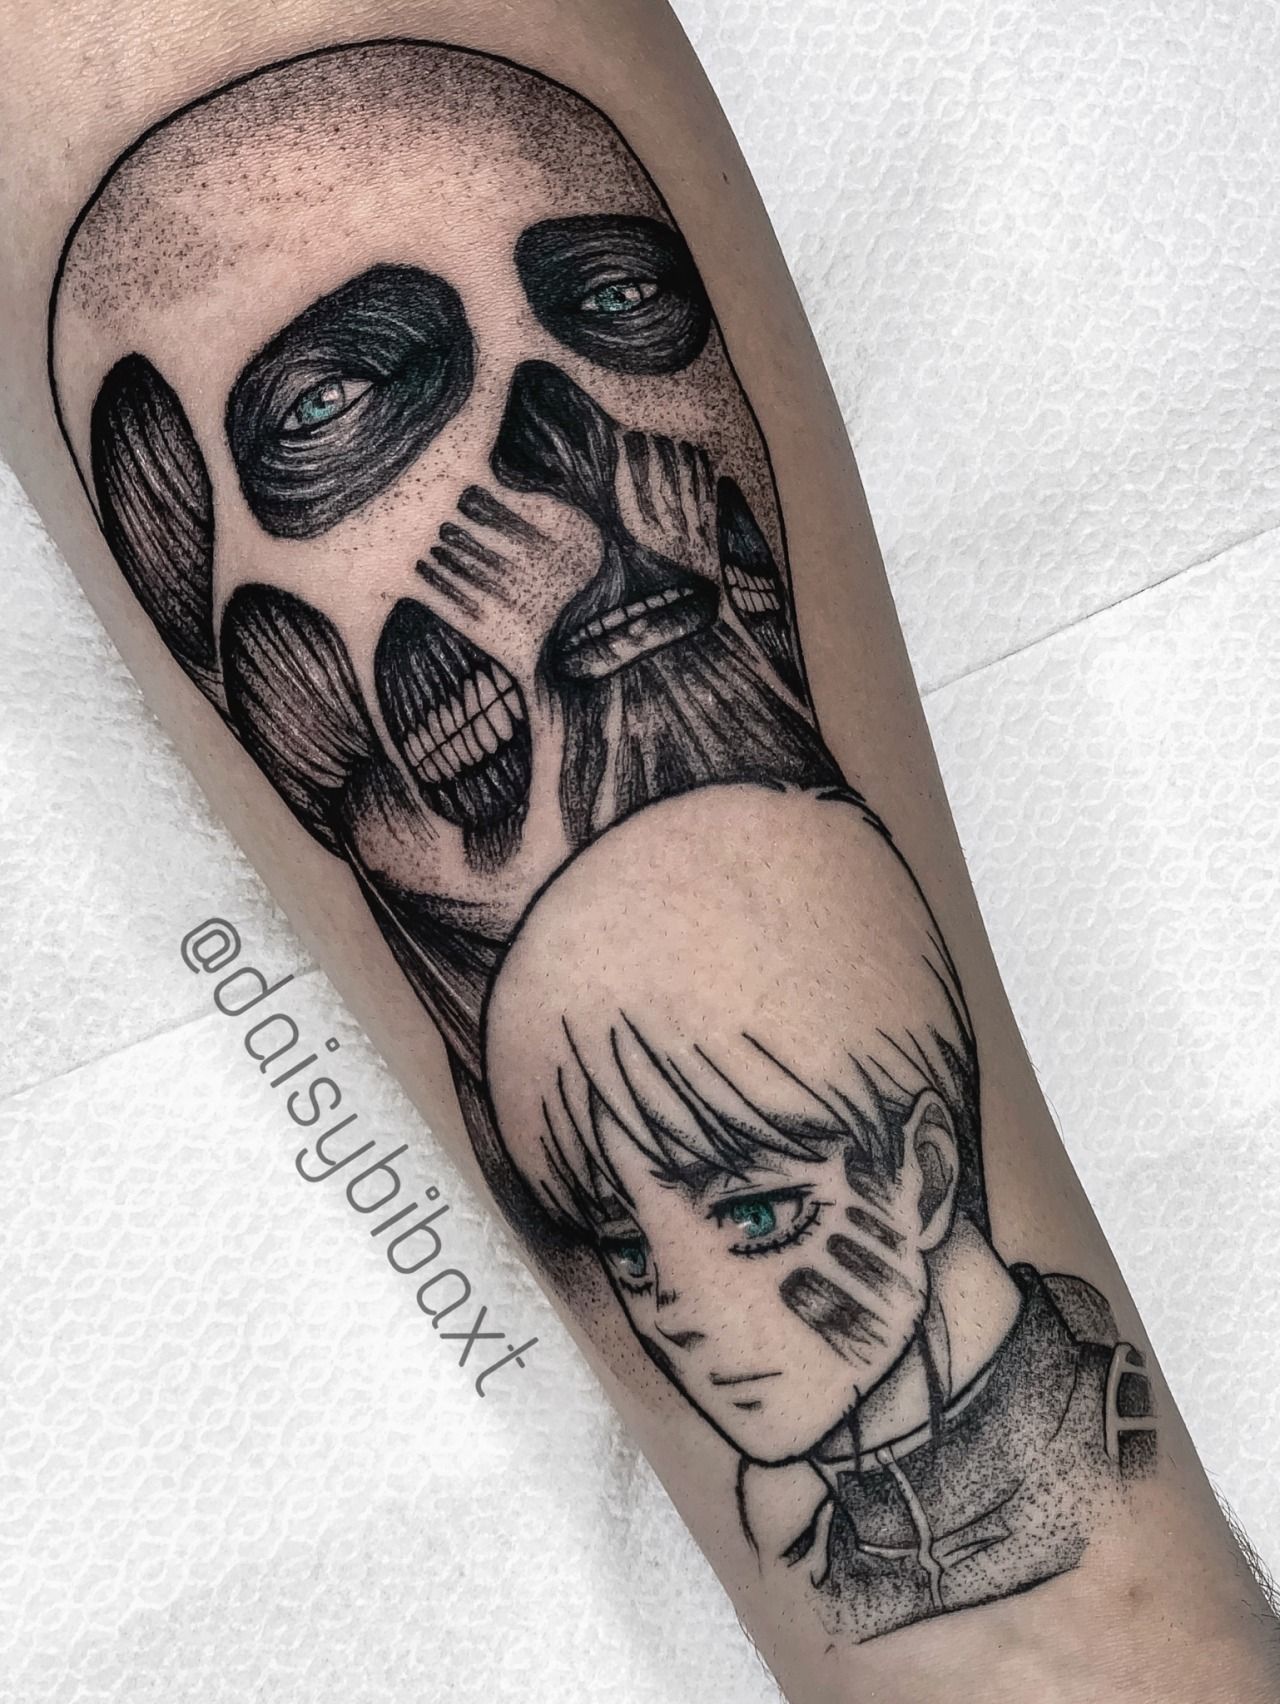 10 Best Attack On Titan Tattoo Ideas Youll Have To See To Believe 